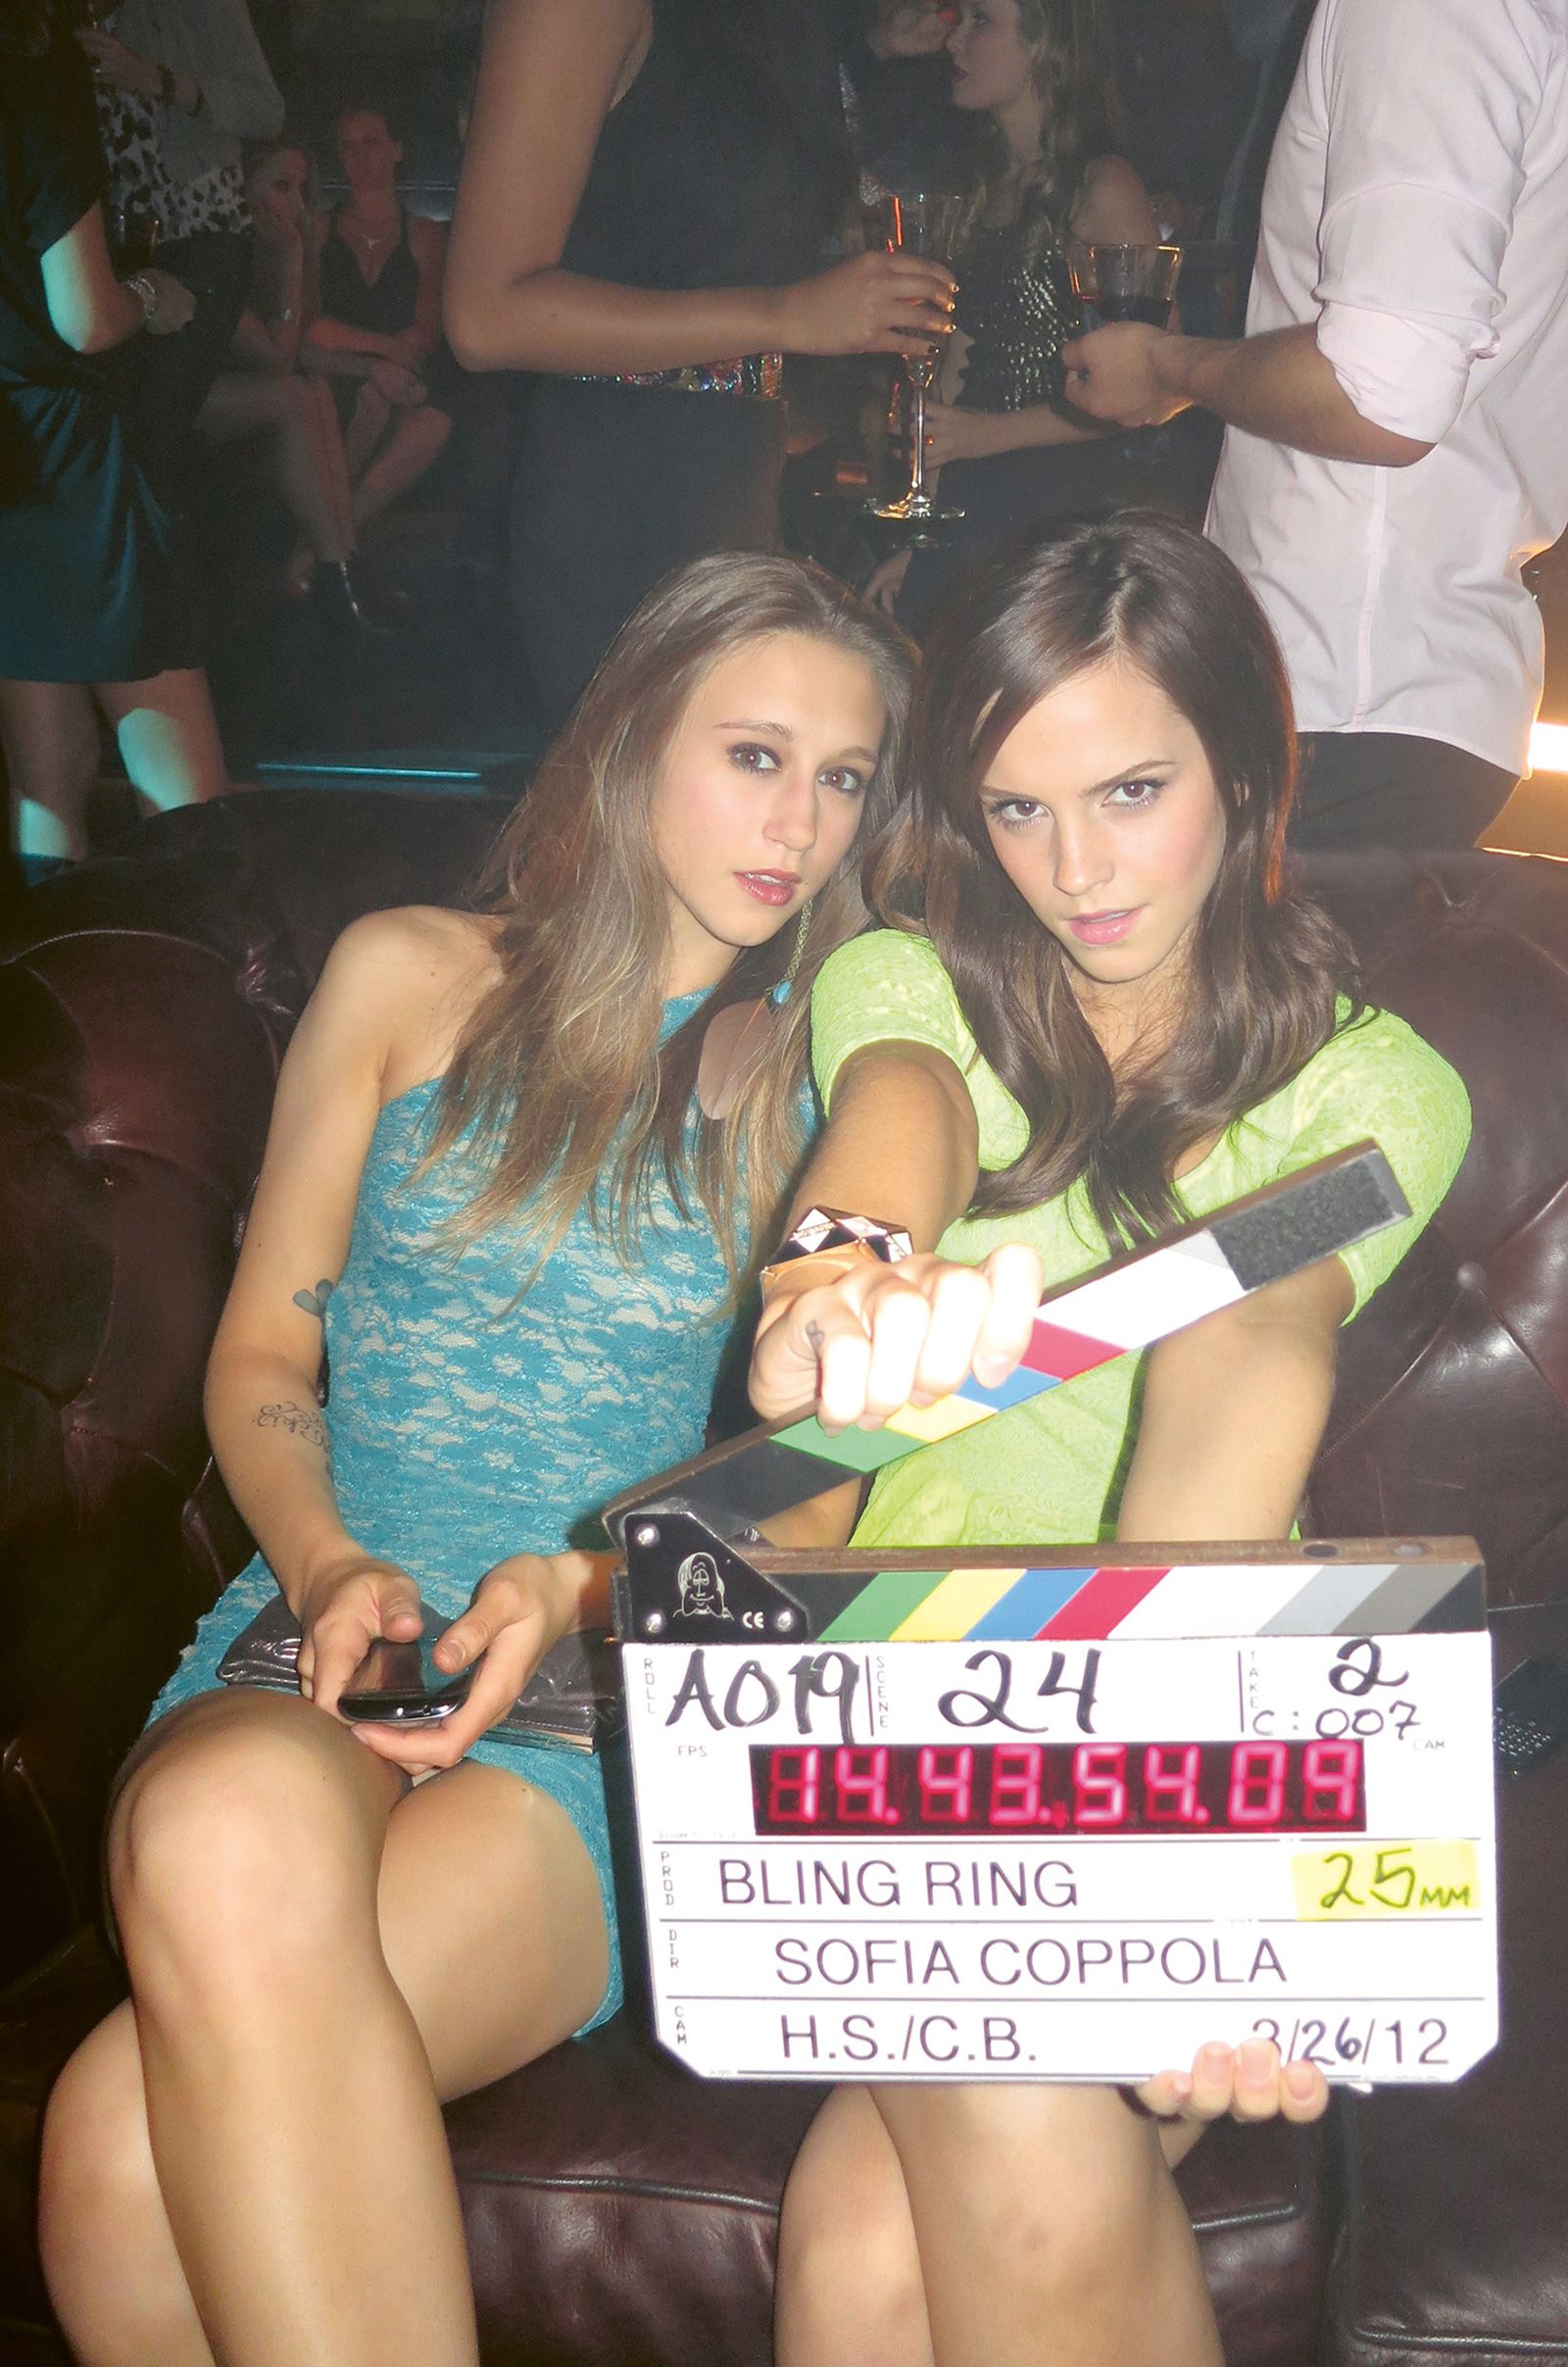 Taissa Farmiga and Emma Watson were among the actors who reenacted the infamous crimes of a group of real-life teens who burglarized A-List celebs in 2013 's "The Bling Ring." Coppola writes in "Archive," that the cast "spent days in night clubs and in Paris Hilton’s closet surrounded by her shoes."